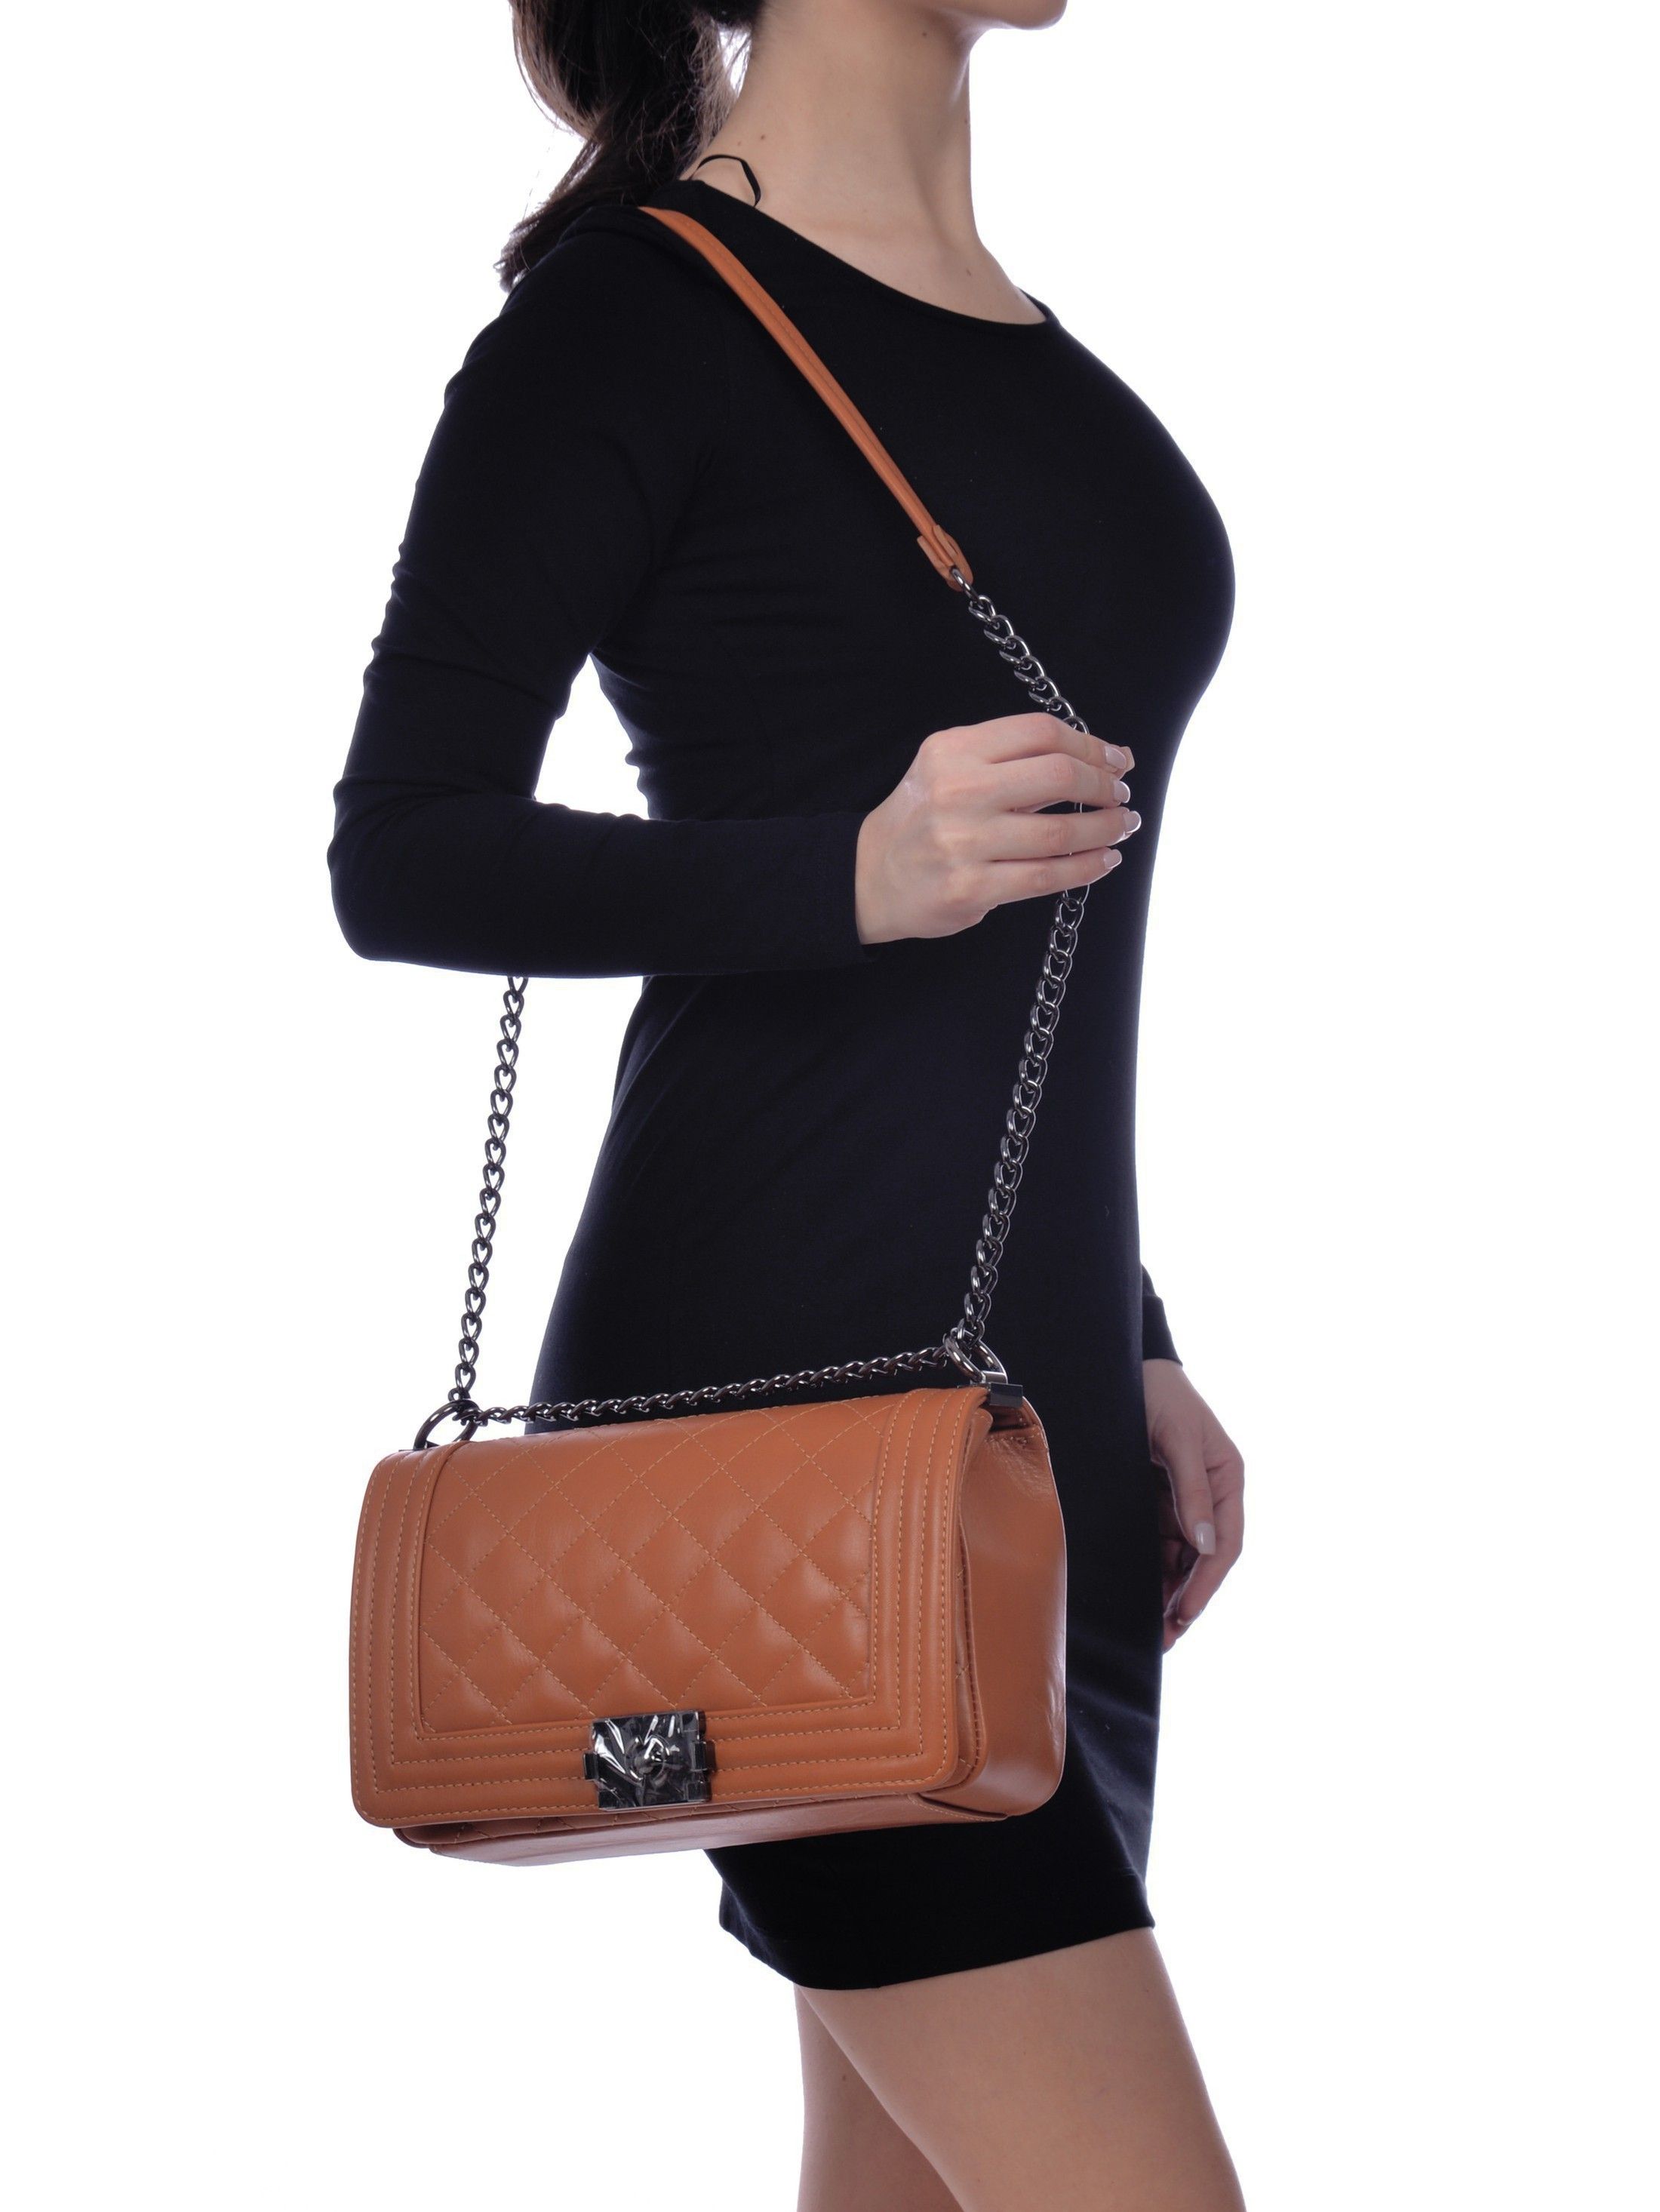 Shoulder Bag
100% cow leather
Flap over with metallic hardware
Interior organizing zip pocket
Interior zip pocket
Interior leather phone pocket
Shoulder chain strap: 110 cm
Dimensions (M): 18x26.5x8.5 cm